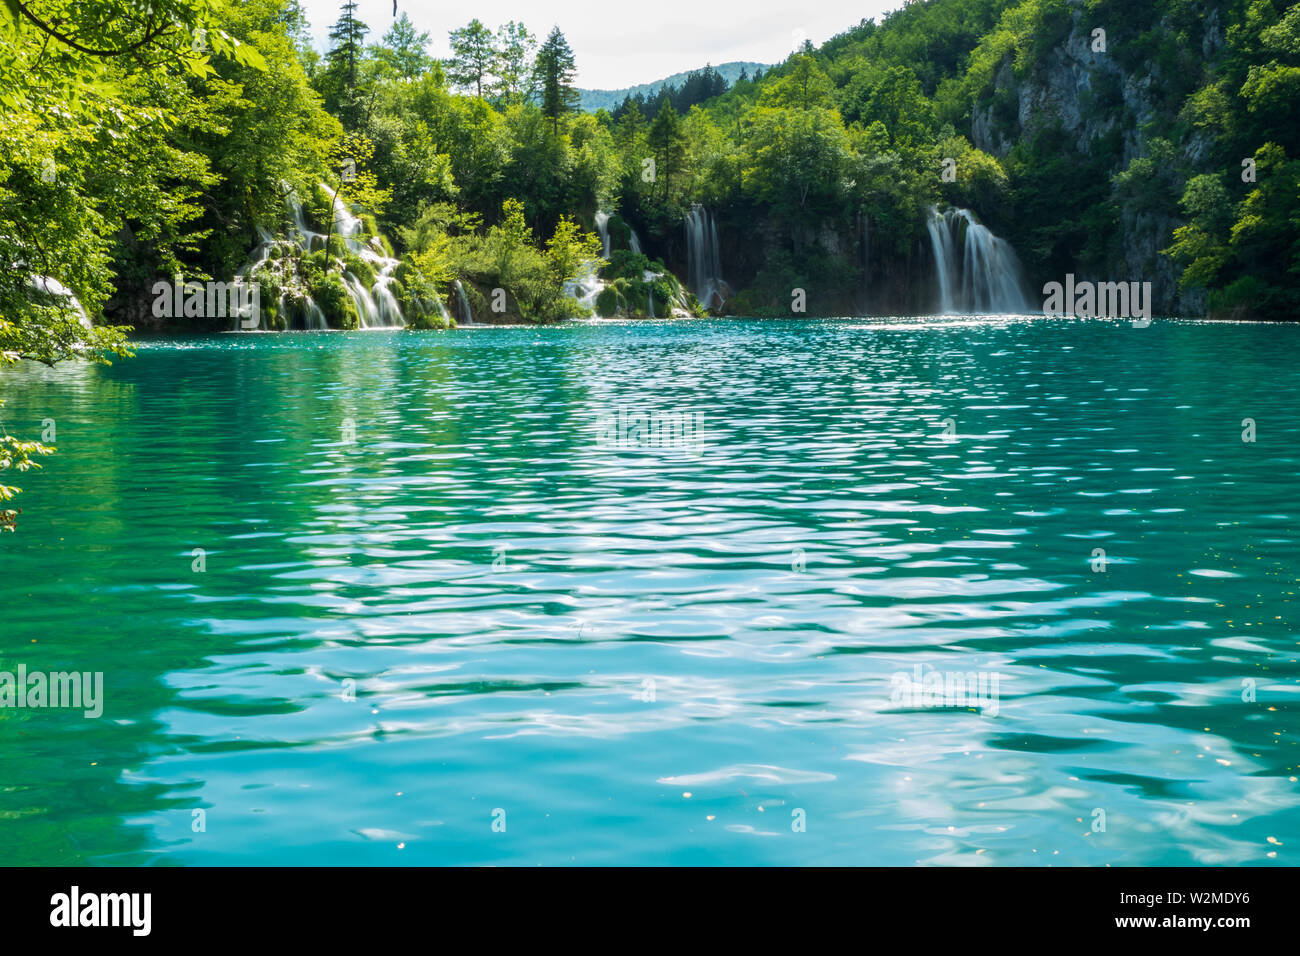 Rushing water cascades down the natural barriers into the crystal clear and azure coloured Lake Milanovac at the Plitvice Lakes National Park, Croatia Stock Photo